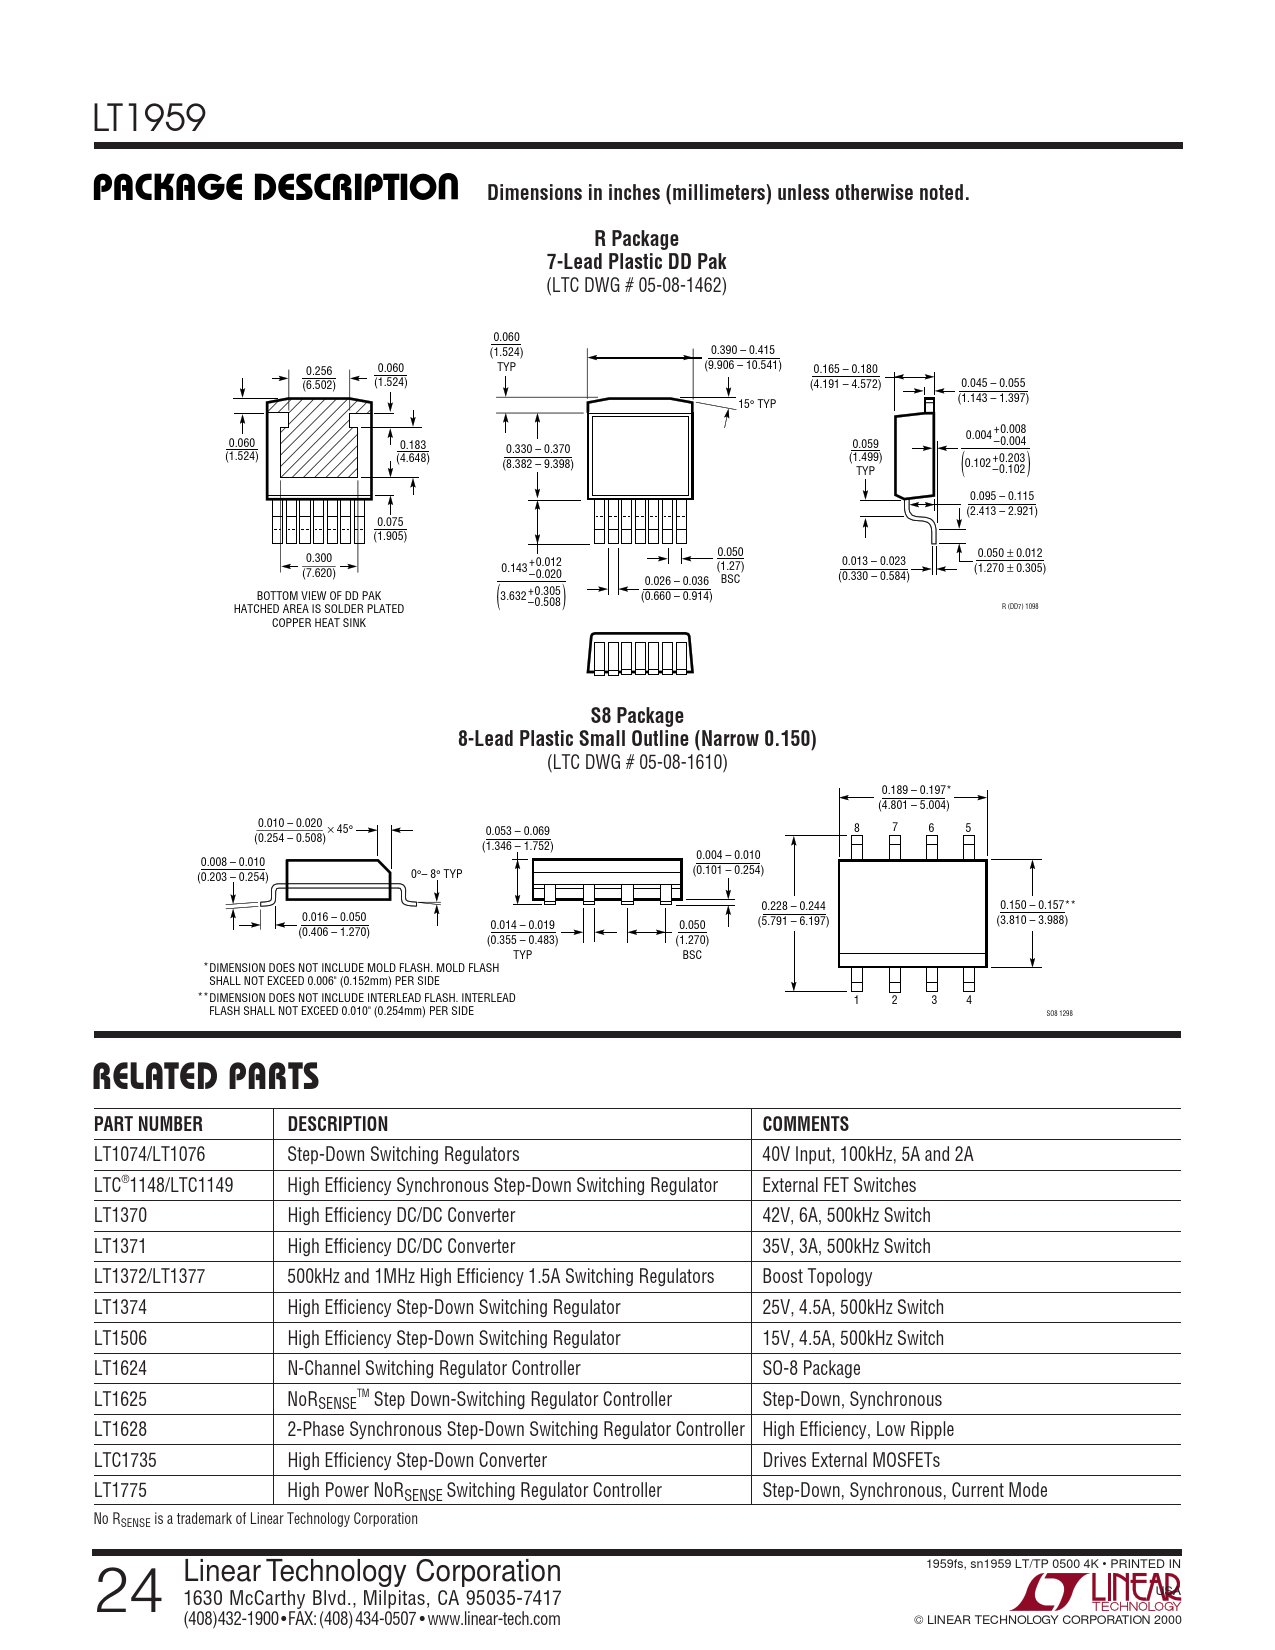 PACKAGE DESCRIPTION Dimensions in inches (millimeters) unless otherwise  noted. R Package. 7-Lead Plastic DD Pak. S8 Package - Datasheet LT1959  Analog Devices